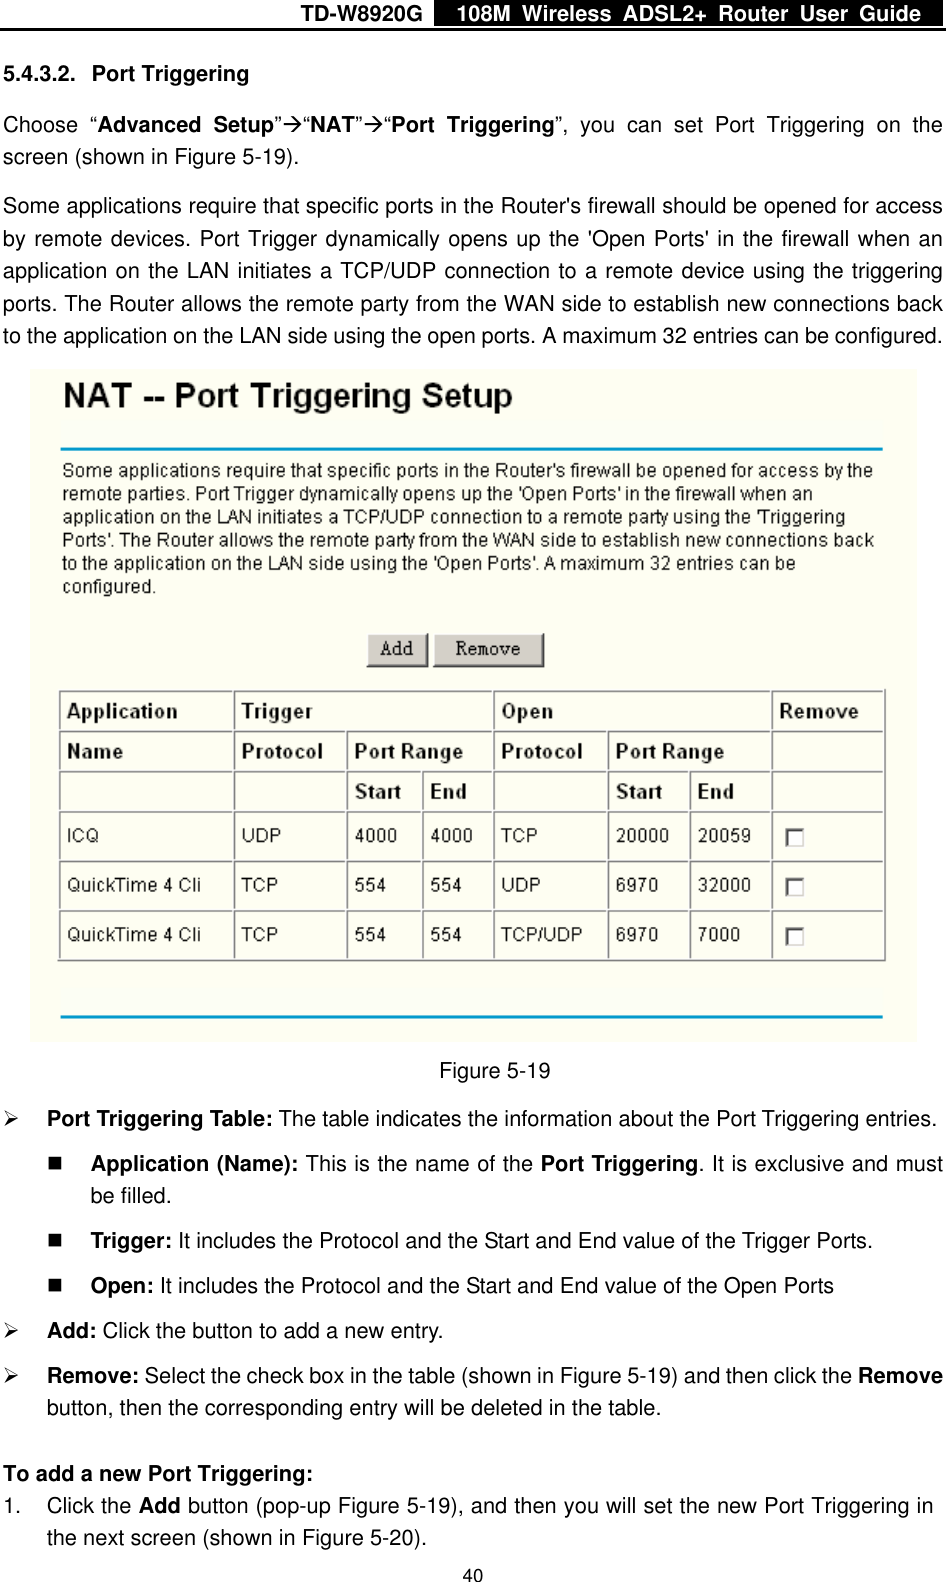 TD-W8920G    108M Wireless ADSL2+ Router User Guide    405.4.3.2. Port Triggering Choose “Advanced Setup”Æ“NAT”Æ“Port Triggering”, you can set Port Triggering on the screen (shown in Figure 5-19). Some applications require that specific ports in the Router&apos;s firewall should be opened for access by remote devices. Port Trigger dynamically opens up the &apos;Open Ports&apos; in the firewall when an application on the LAN initiates a TCP/UDP connection to a remote device using the triggering ports. The Router allows the remote party from the WAN side to establish new connections back to the application on the LAN side using the open ports. A maximum 32 entries can be configured.  Figure 5-19 ¾ Port Triggering Table: The table indicates the information about the Port Triggering entries.  Application (Name): This is the name of the Port Triggering. It is exclusive and must be filled.  Trigger: It includes the Protocol and the Start and End value of the Trigger Ports.  Open: It includes the Protocol and the Start and End value of the Open Ports ¾ Add: Click the button to add a new entry. ¾ Remove: Select the check box in the table (shown in Figure 5-19) and then click the Remove button, then the corresponding entry will be deleted in the table.  To add a new Port Triggering: 1. Click the Add button (pop-up Figure 5-19), and then you will set the new Port Triggering in the next screen (shown in Figure 5-20). 